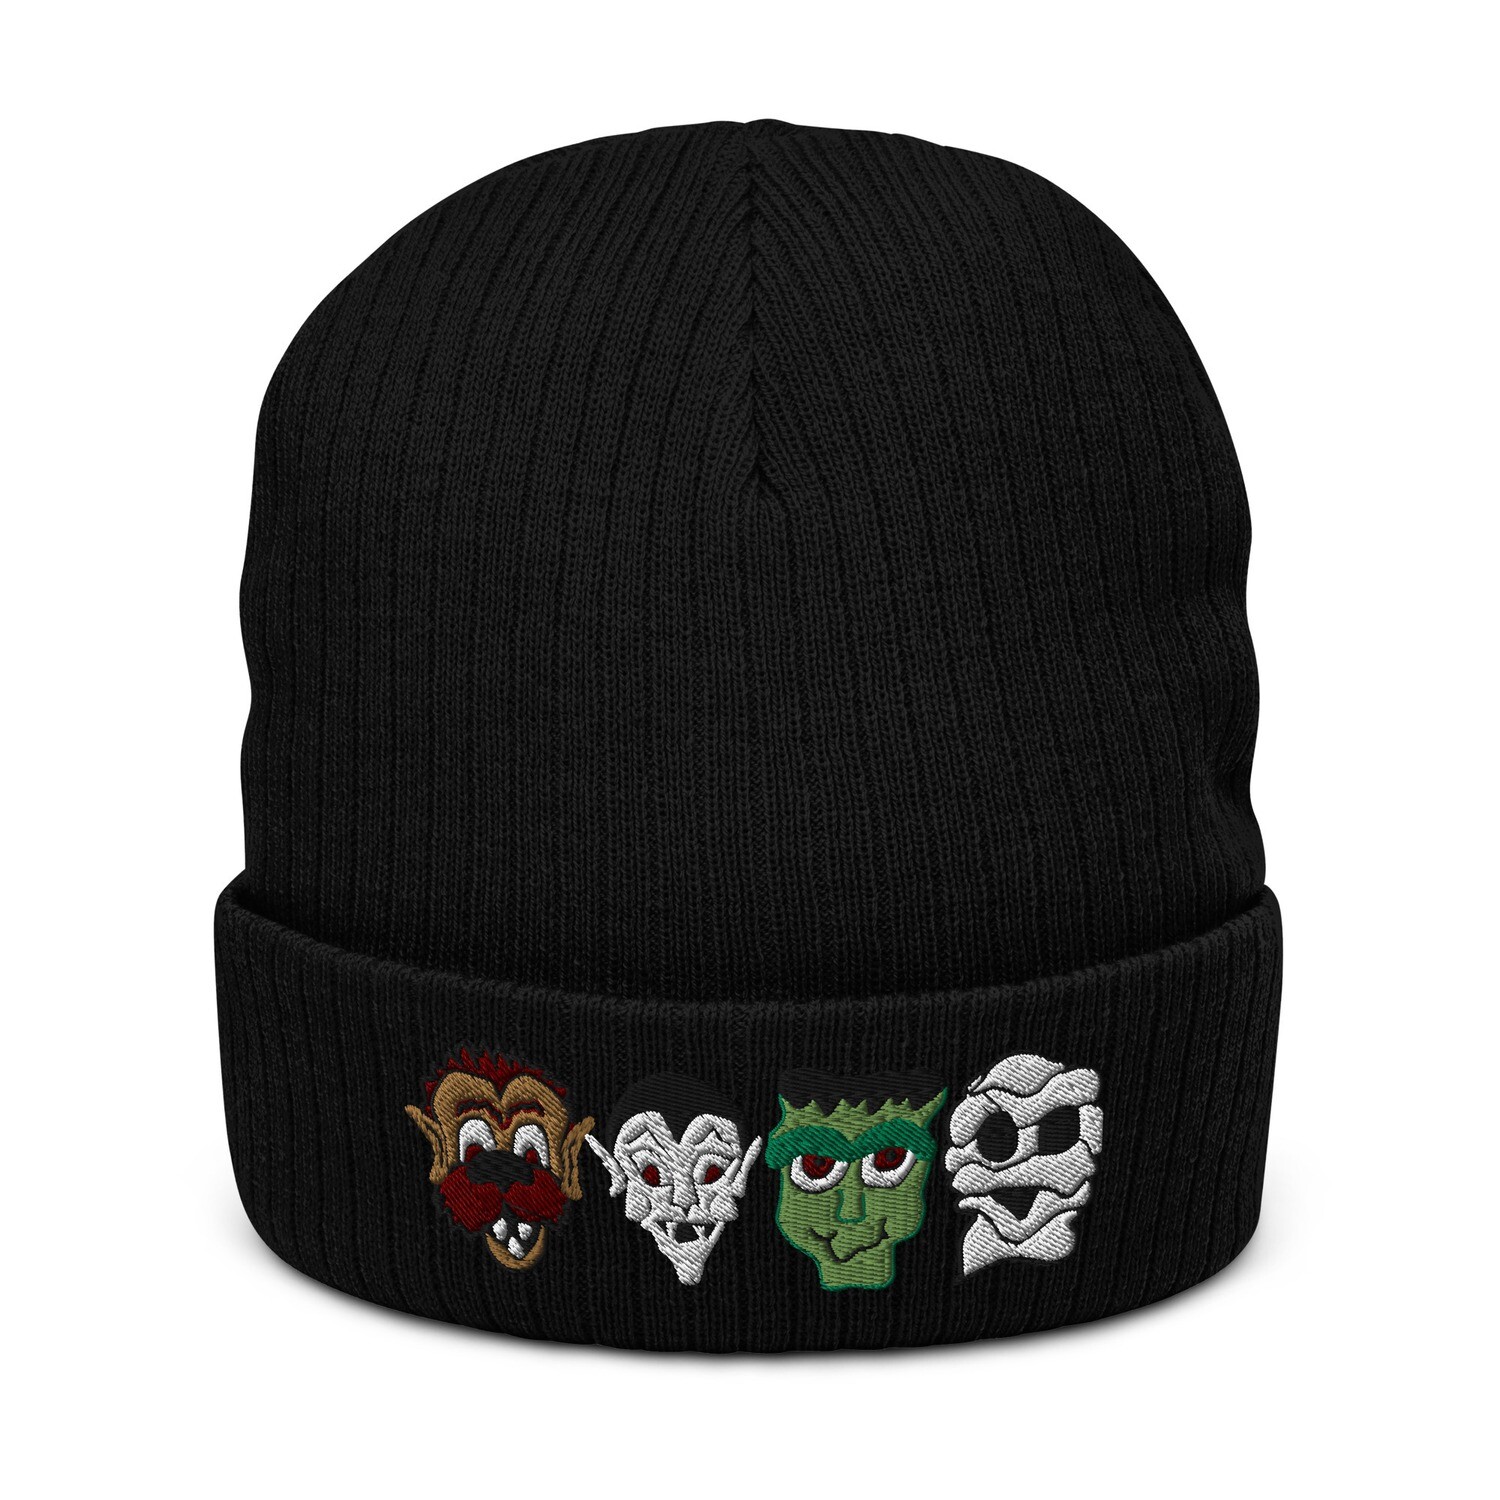 Classic Monsters Ribbed knit beanie